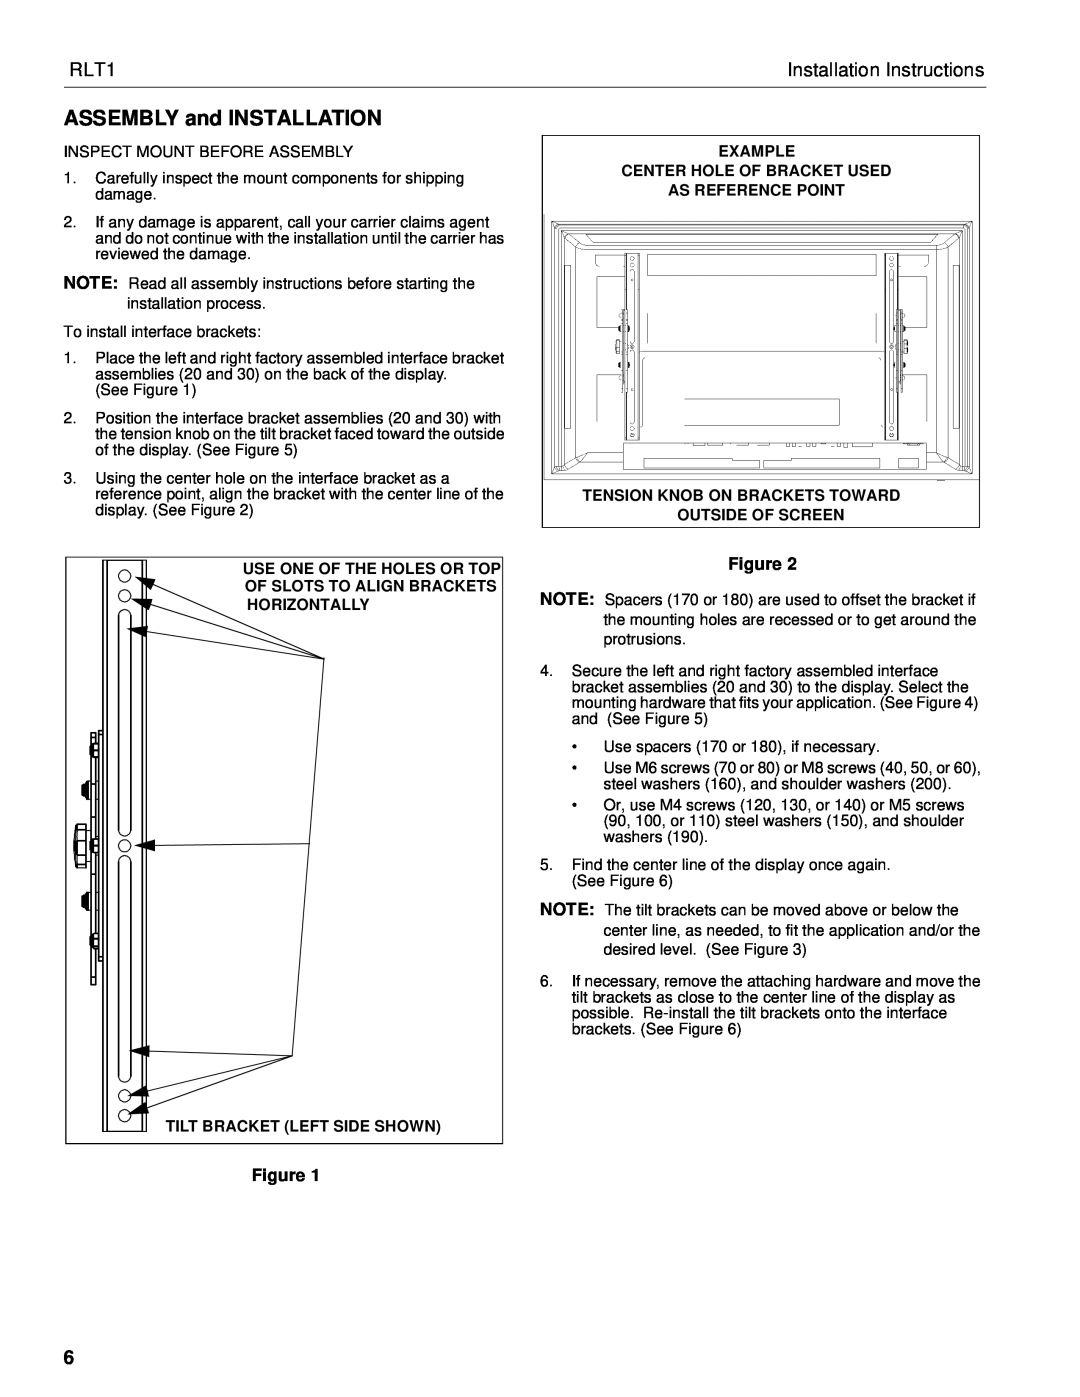 Chief Manufacturing RLT1 installation instructions ASSEMBLY and INSTALLATION, Figure, Installation Instructions 